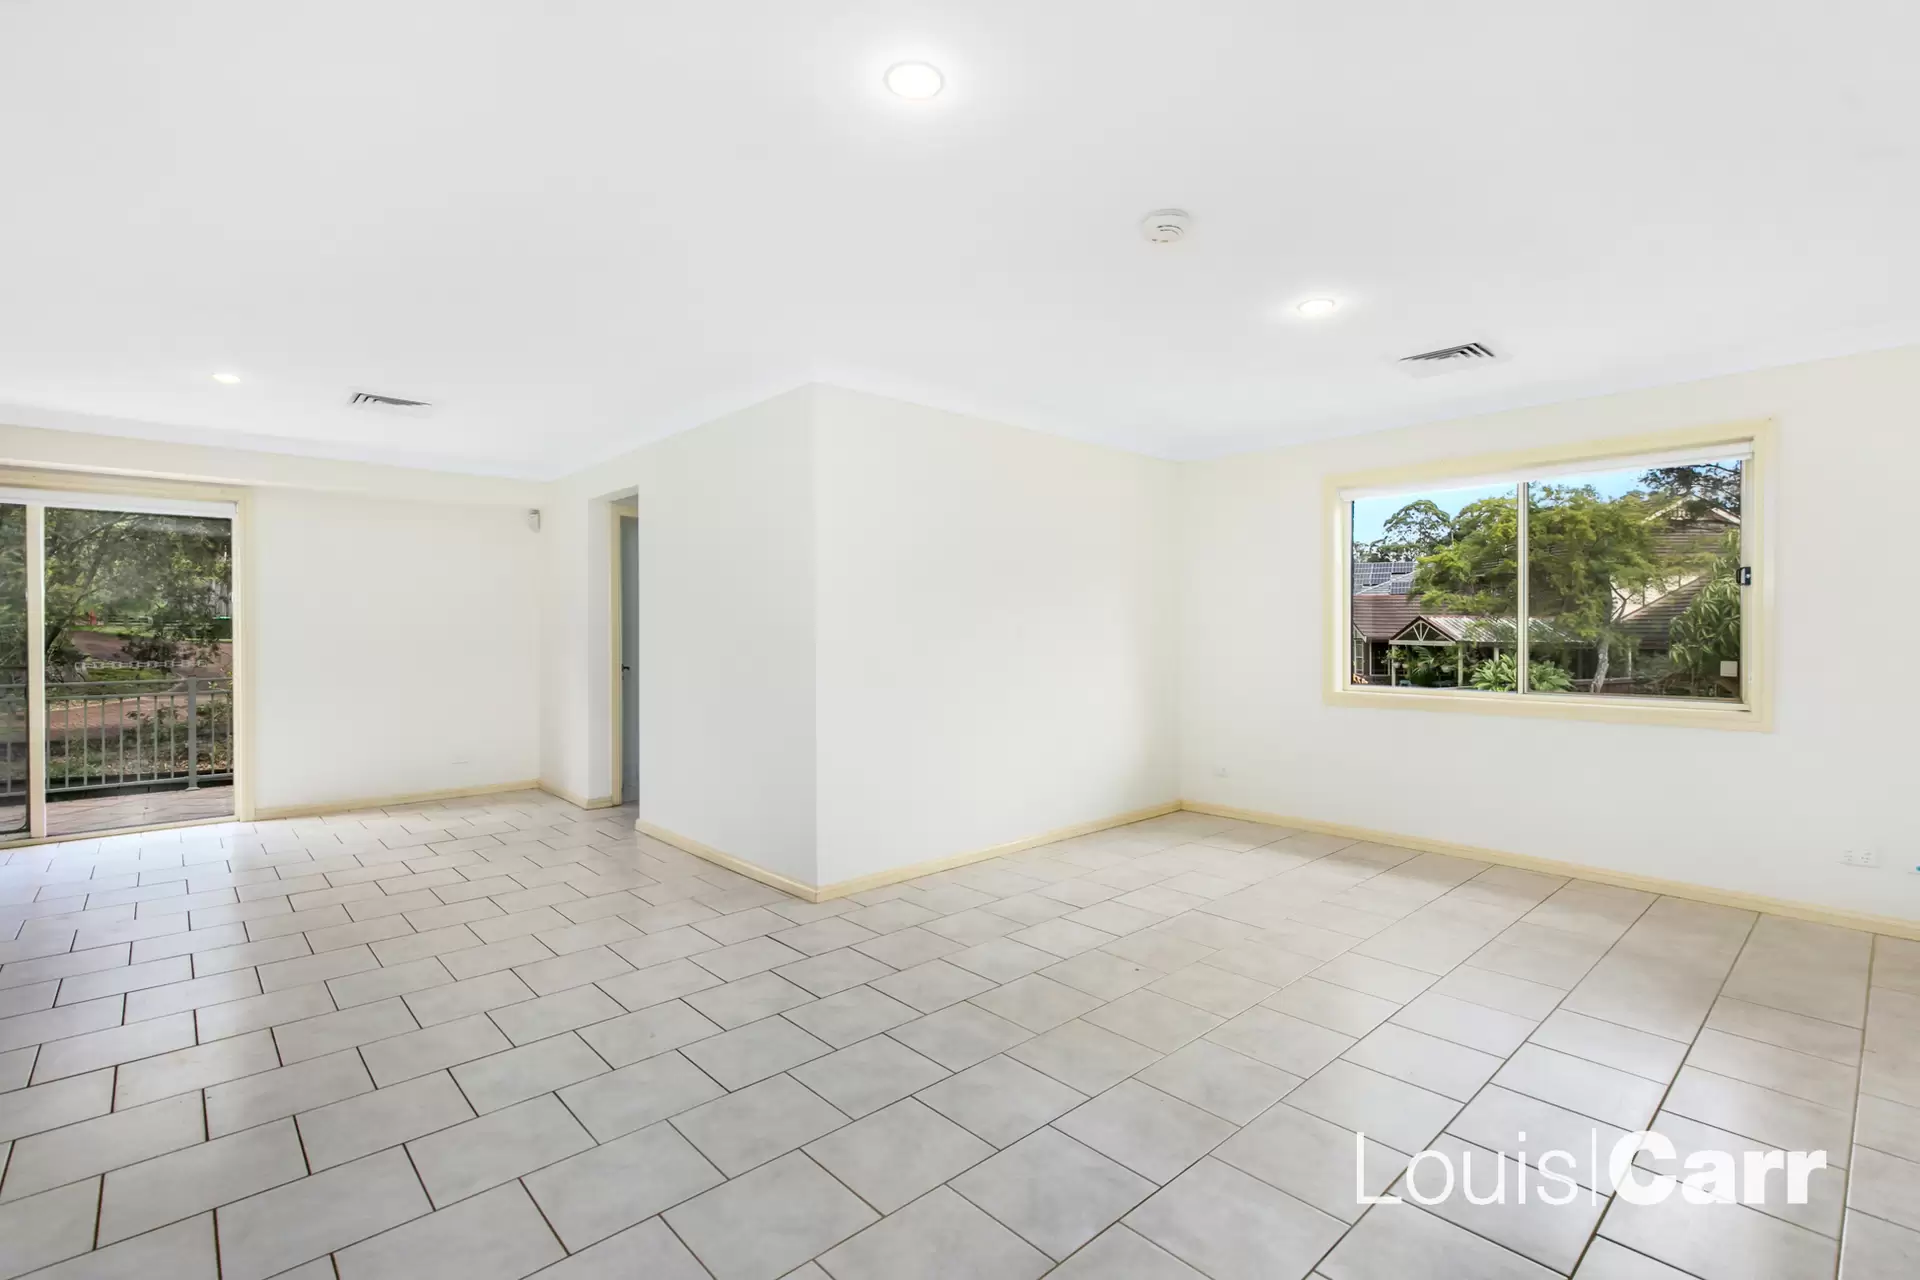 72 Highs Road, West Pennant Hills Leased by Louis Carr Real Estate - image 7